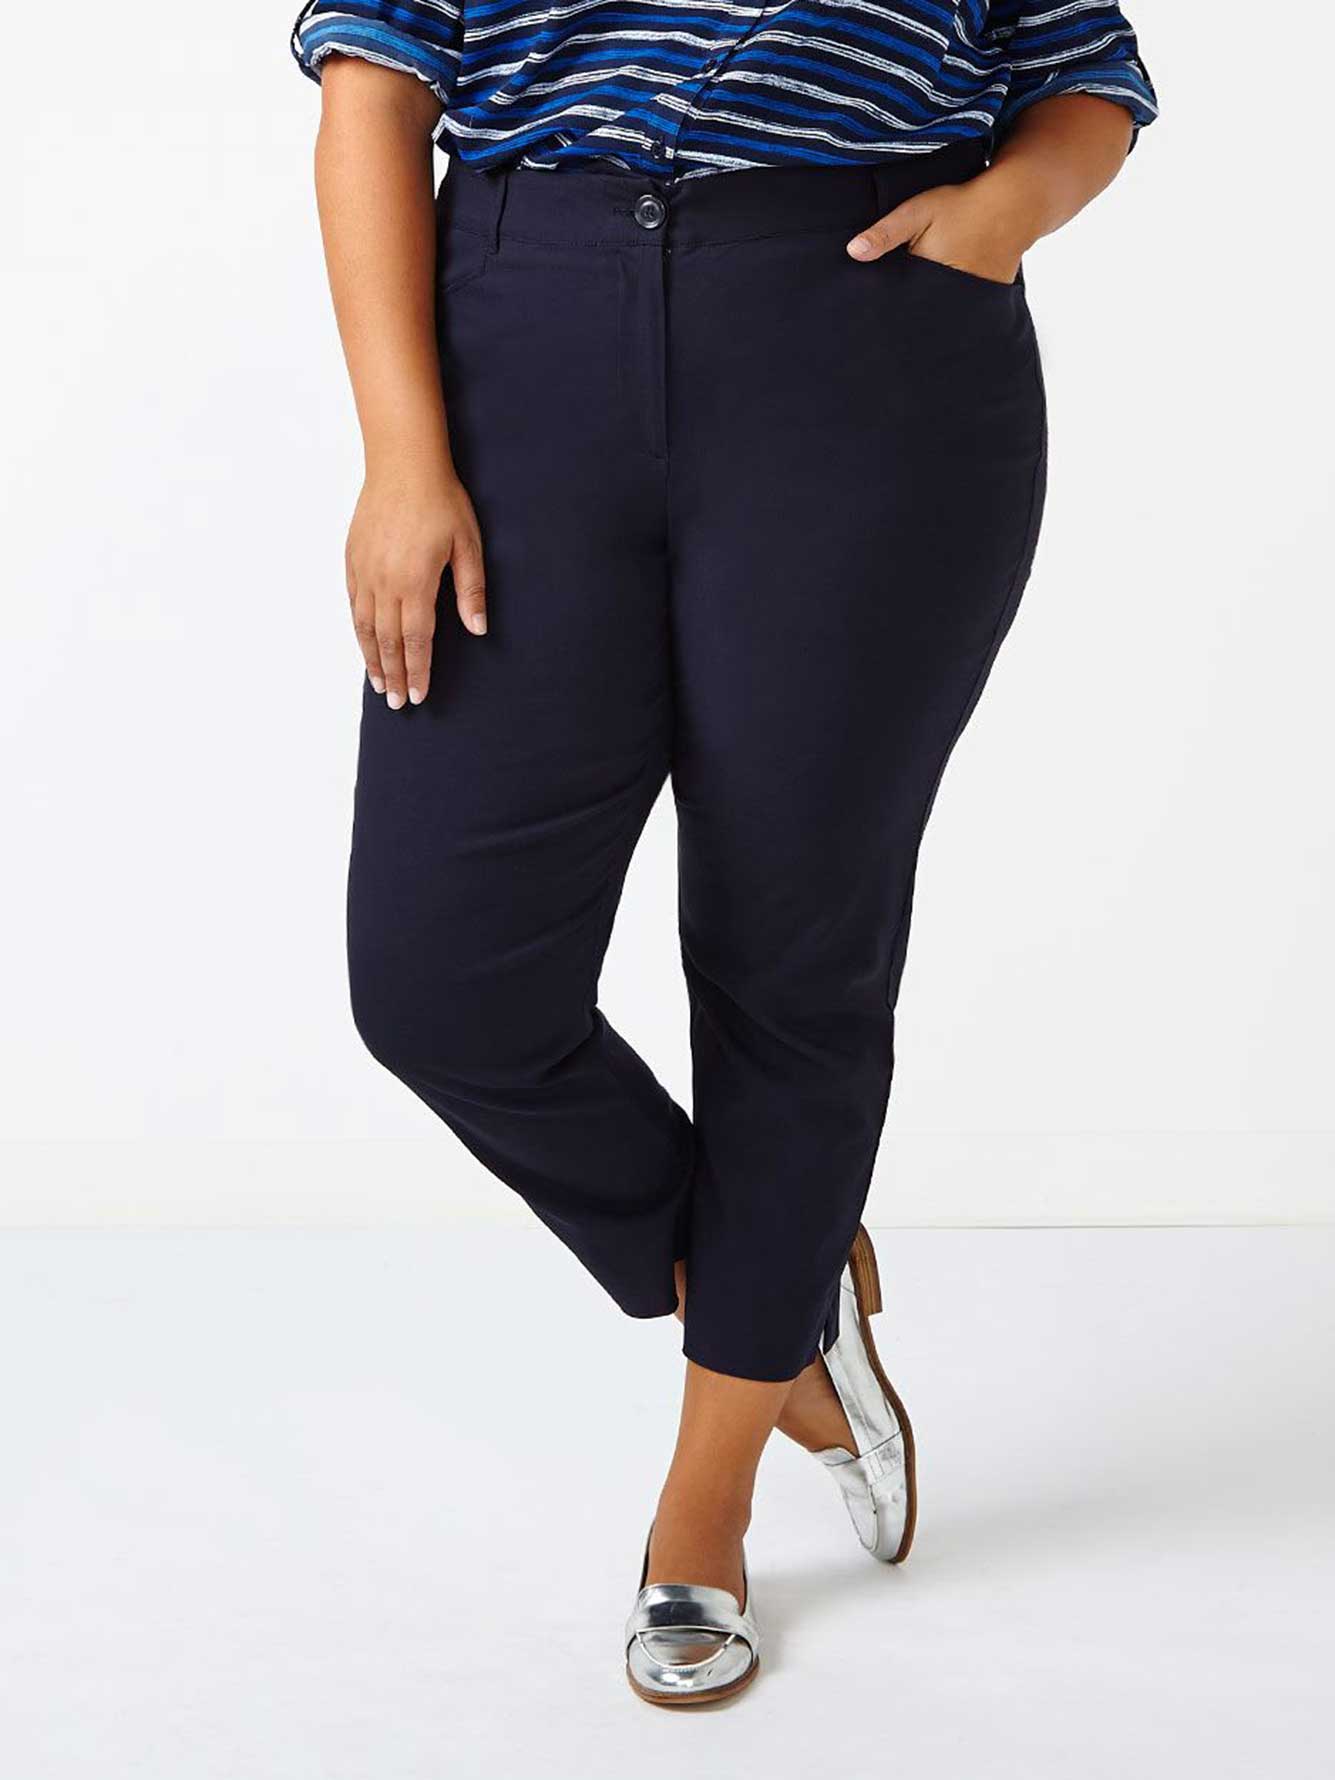 Savvy Chic Ankle Pant | Penningtons